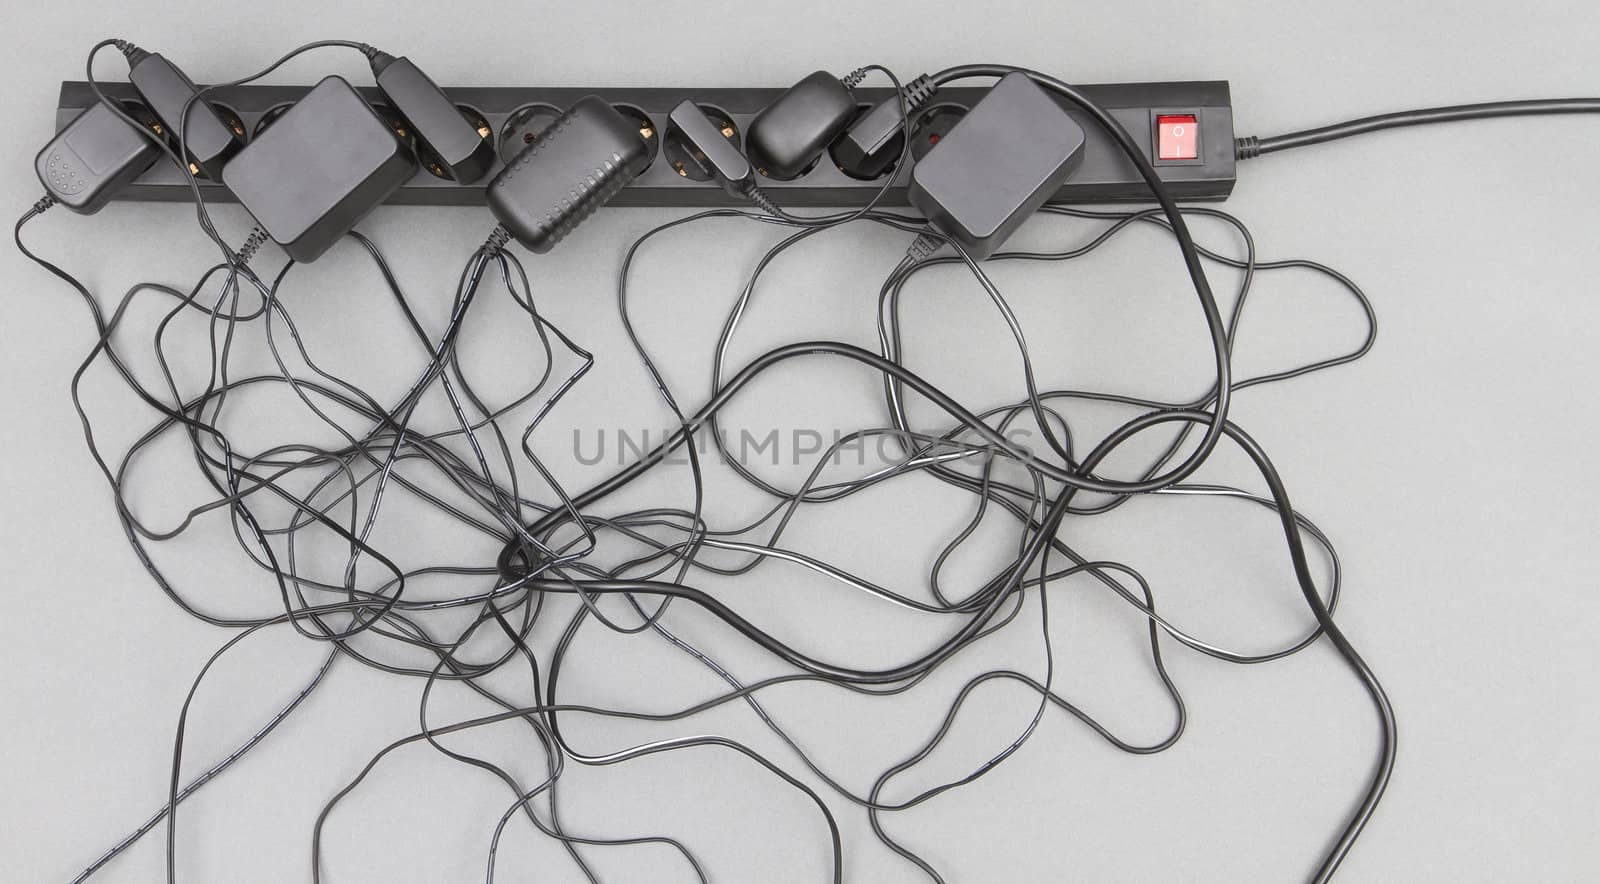 multiple socket with many power supplies in grey background